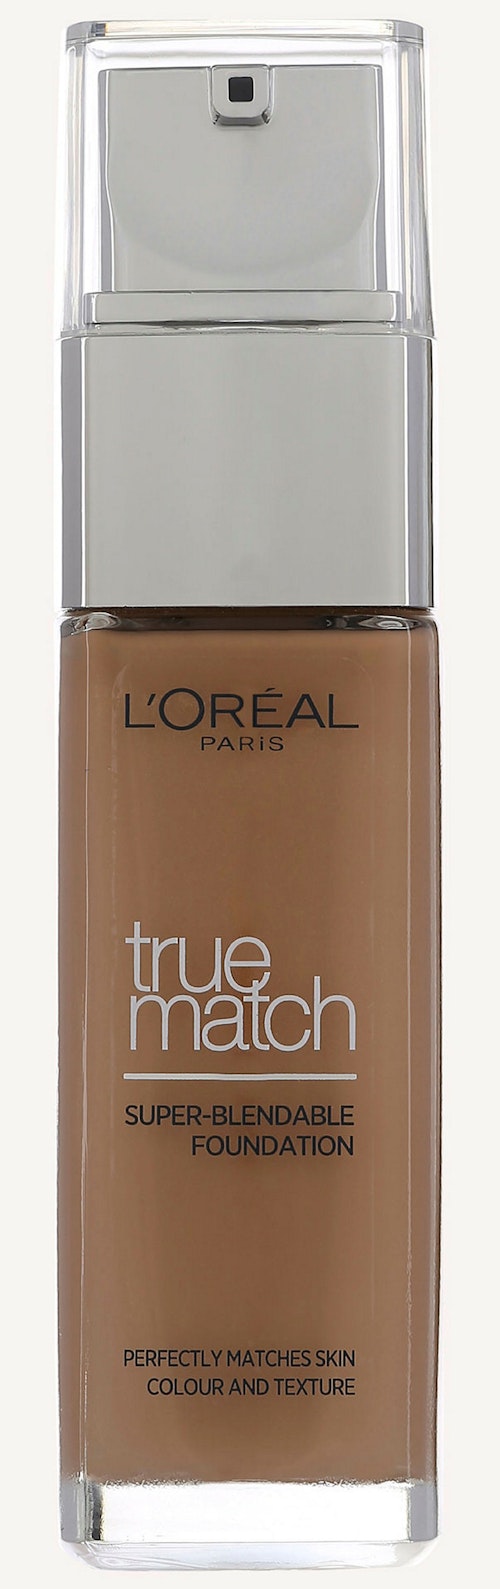 L'Oreal True Match Amber Gold 7D/7W Foundation